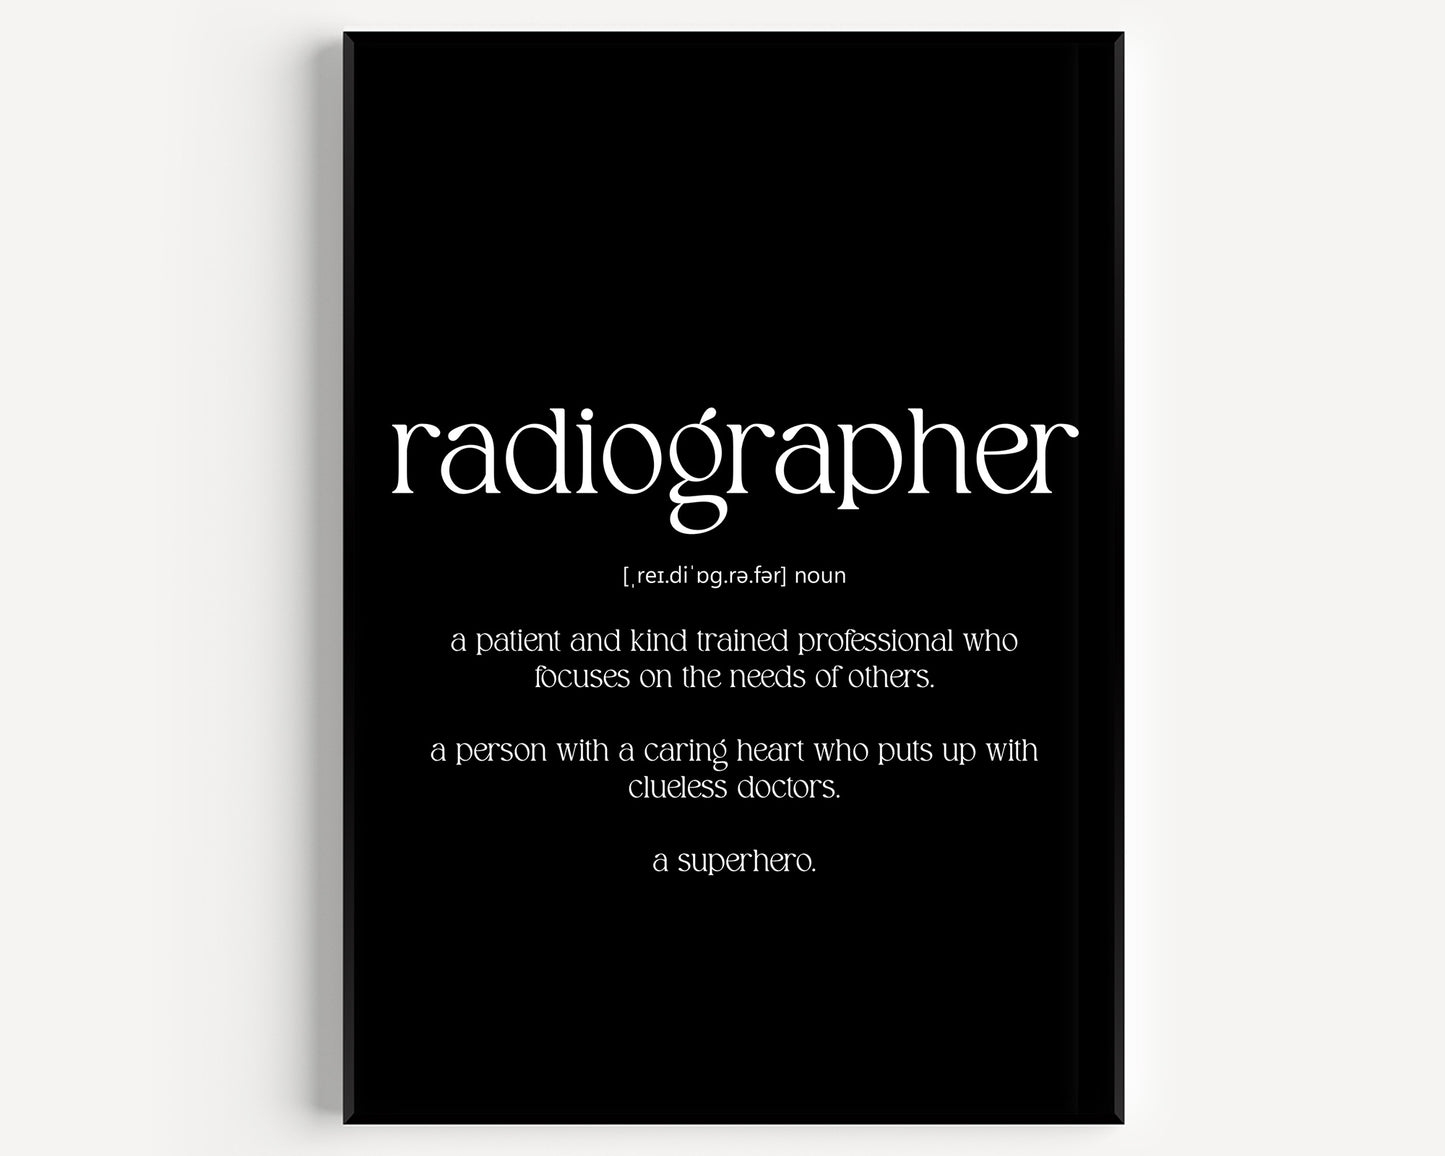 Radiographer Definition Print - Magic Posters